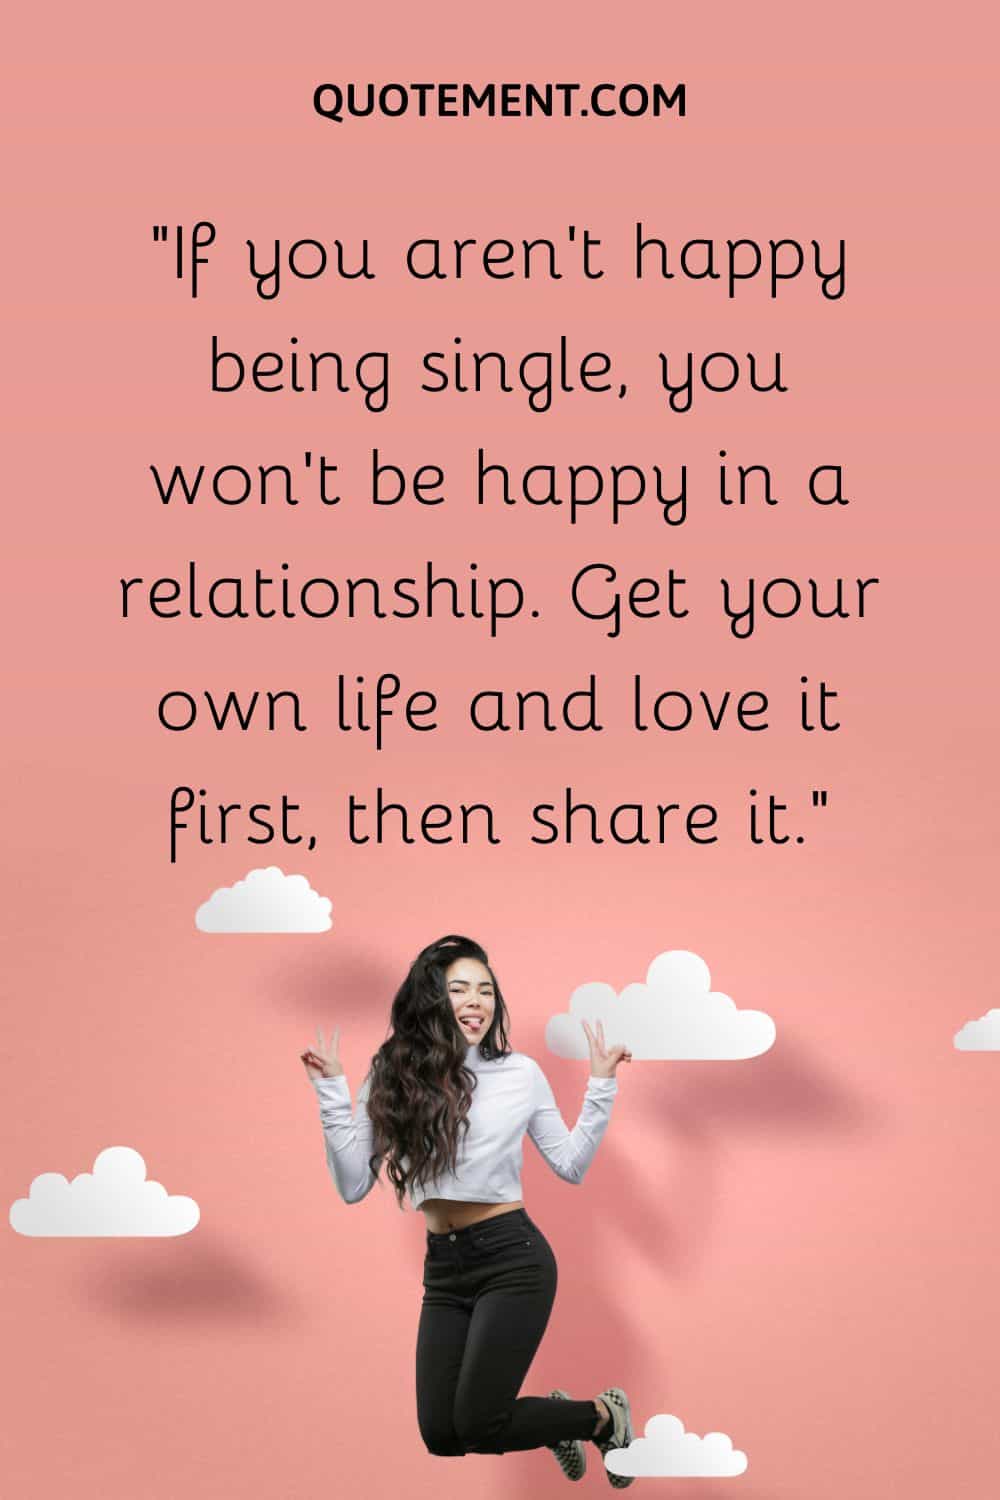 If you aren’t happy being single, you won’t be happy in a relationship